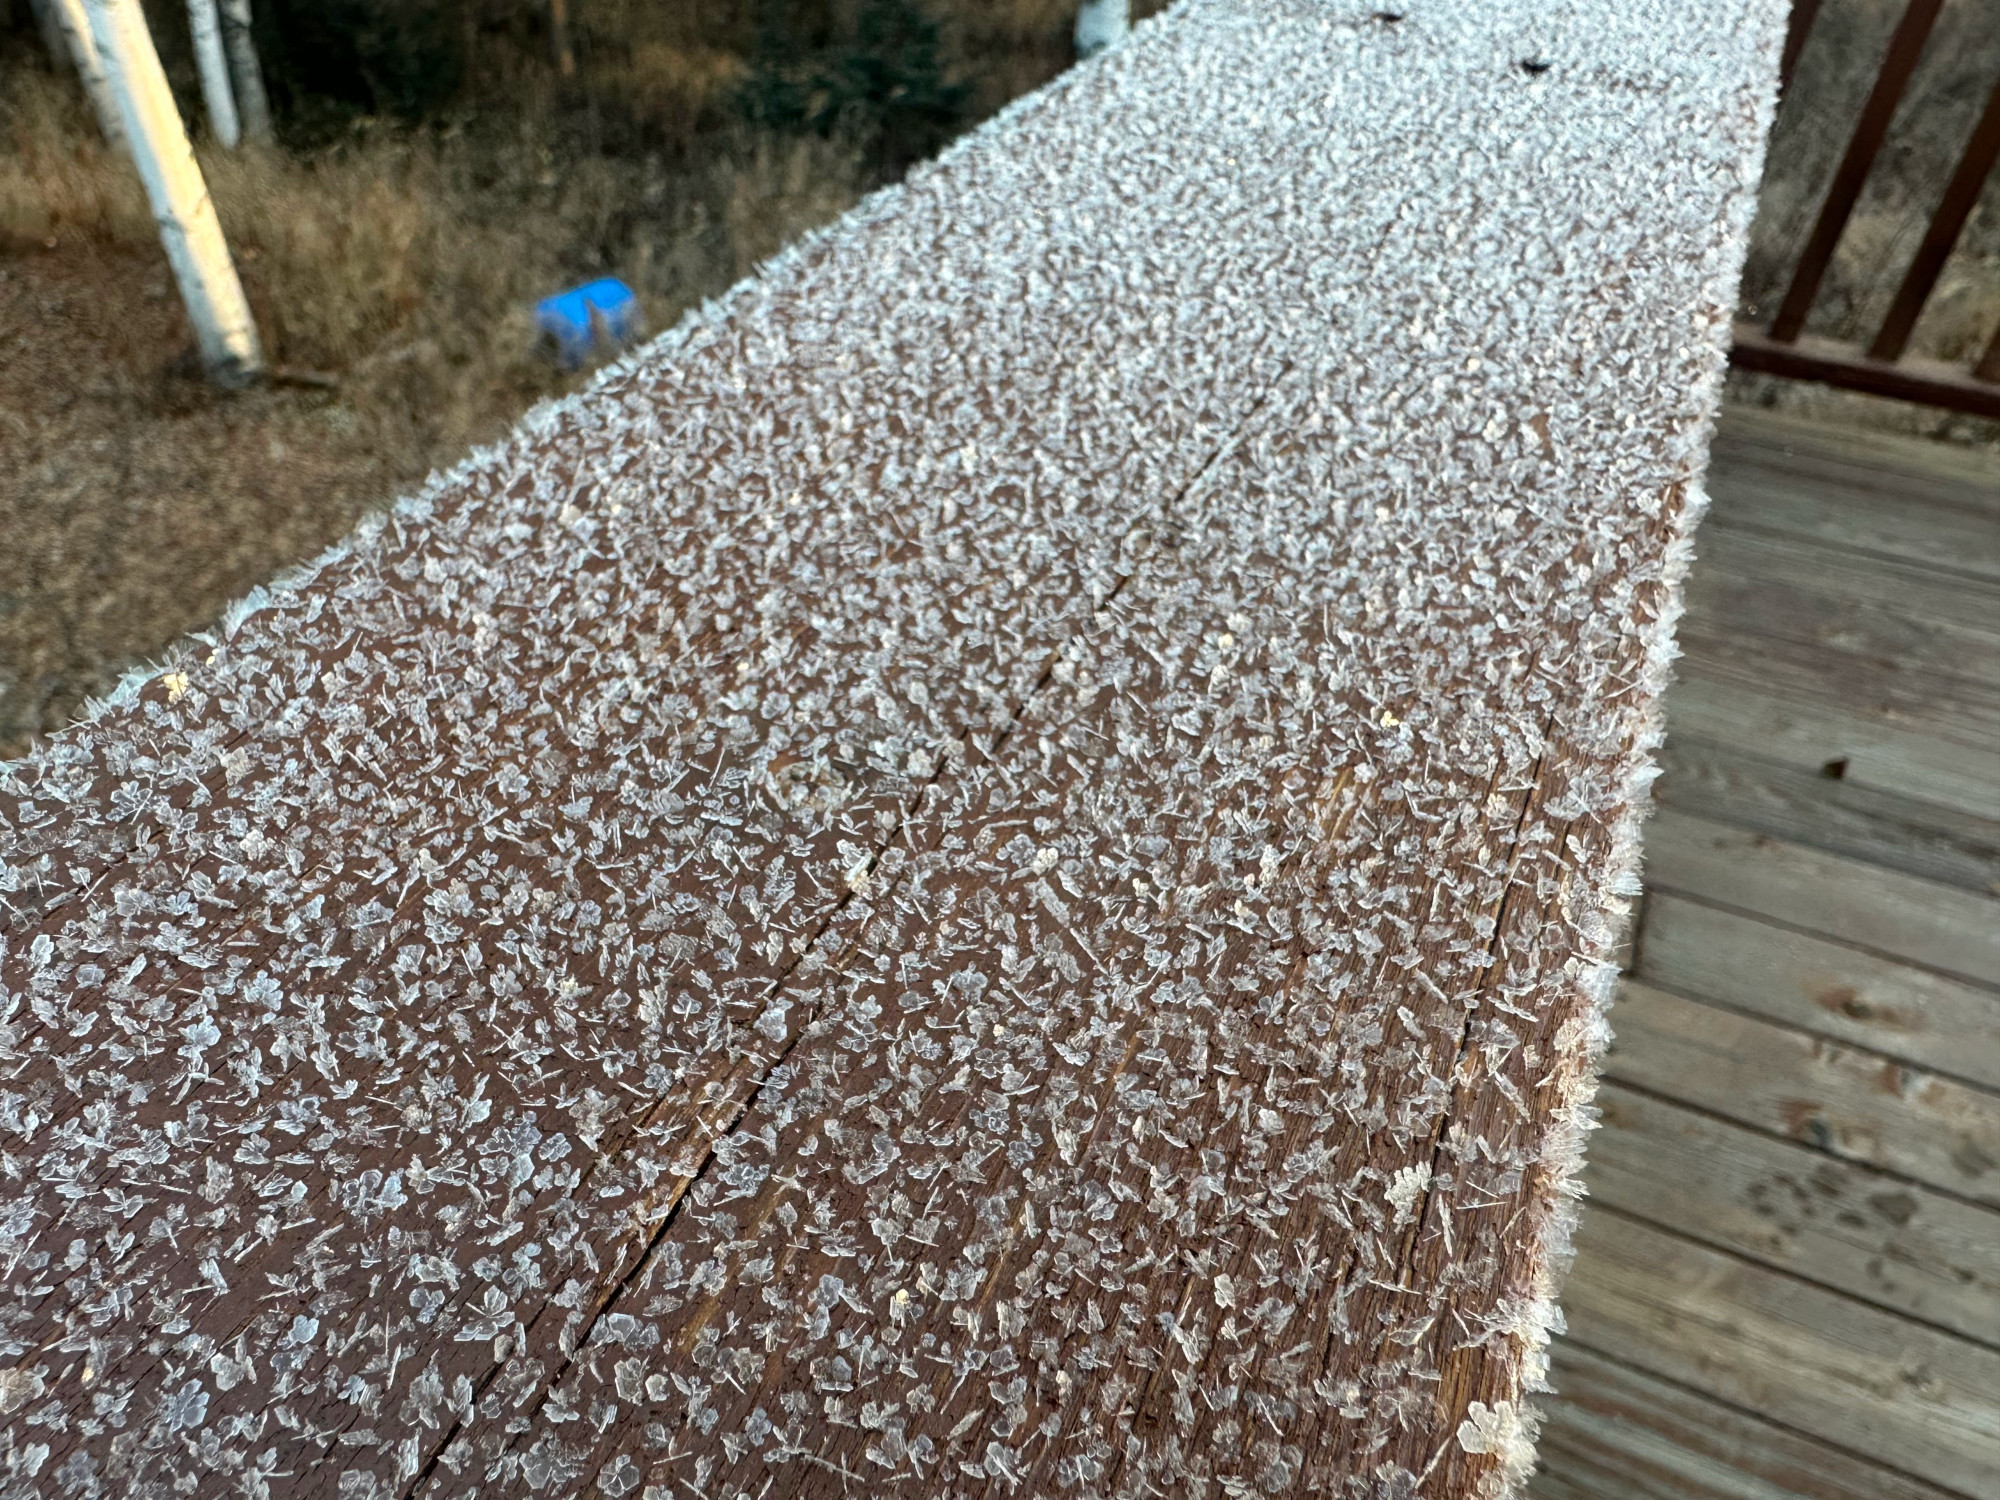 Hoarfrost on our deck